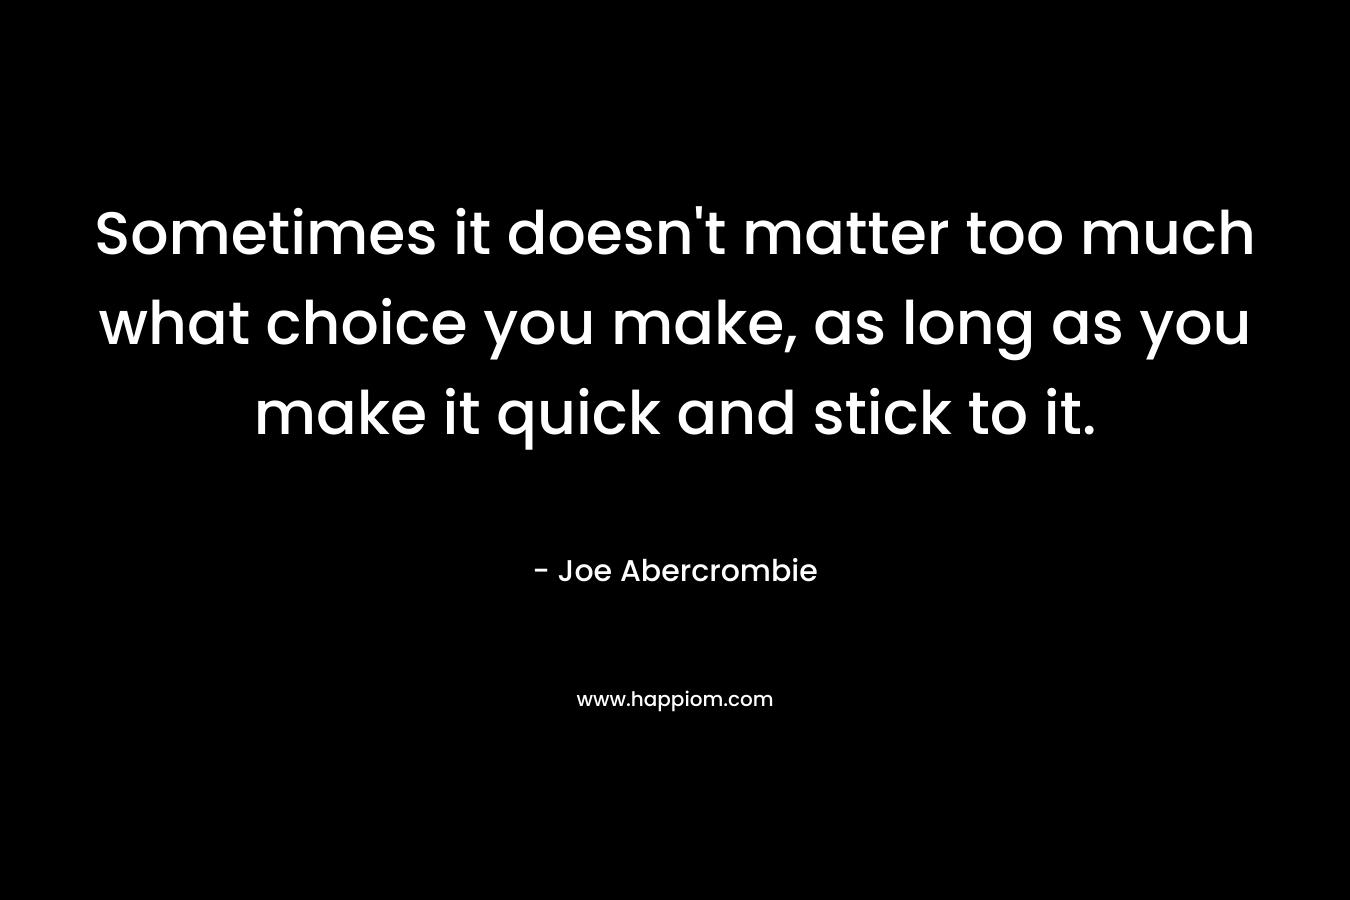 Sometimes it doesn't matter too much what choice you make, as long as you make it quick and stick to it.